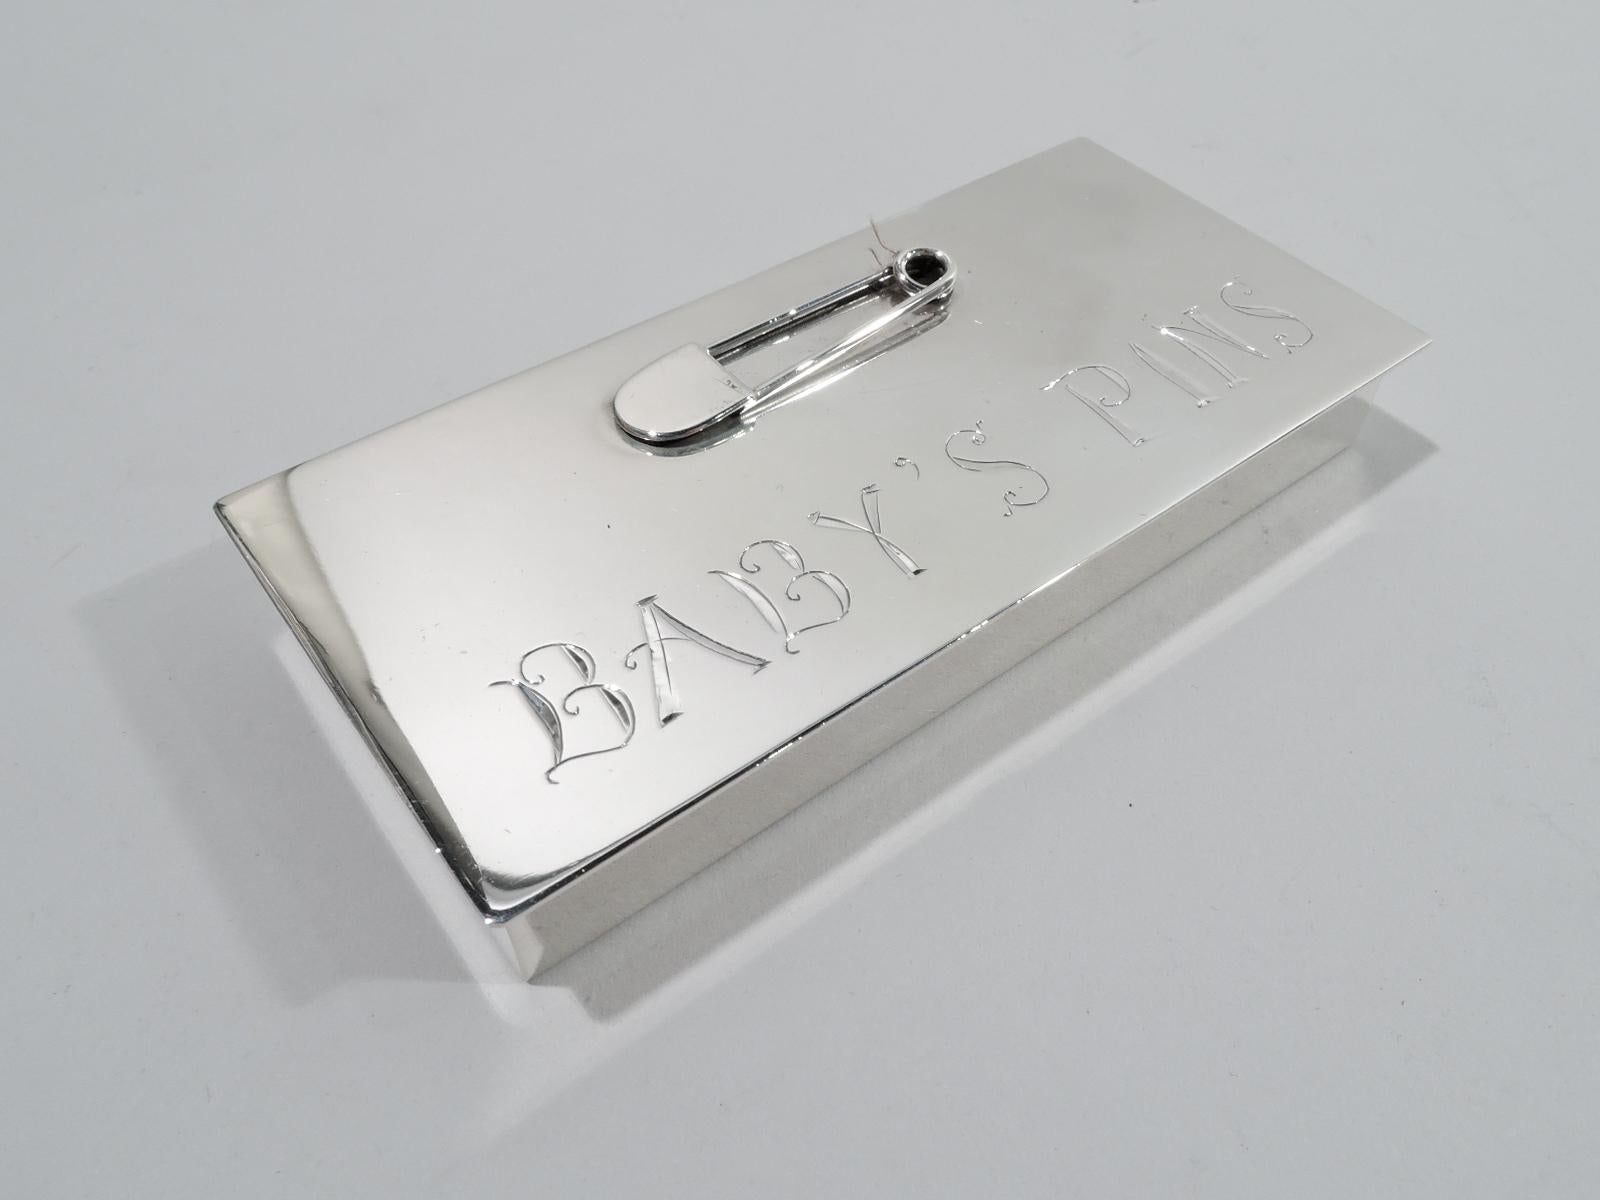 Baby Boom-era sterling silver diaper pin box. Rectangular with straight sides and sharp corners. Cover flat, hinged, and overhanging. On cover top is applied safety pin above engraved words “Baby’s Pins”. A sweet memento of postwar fecundity. Marked